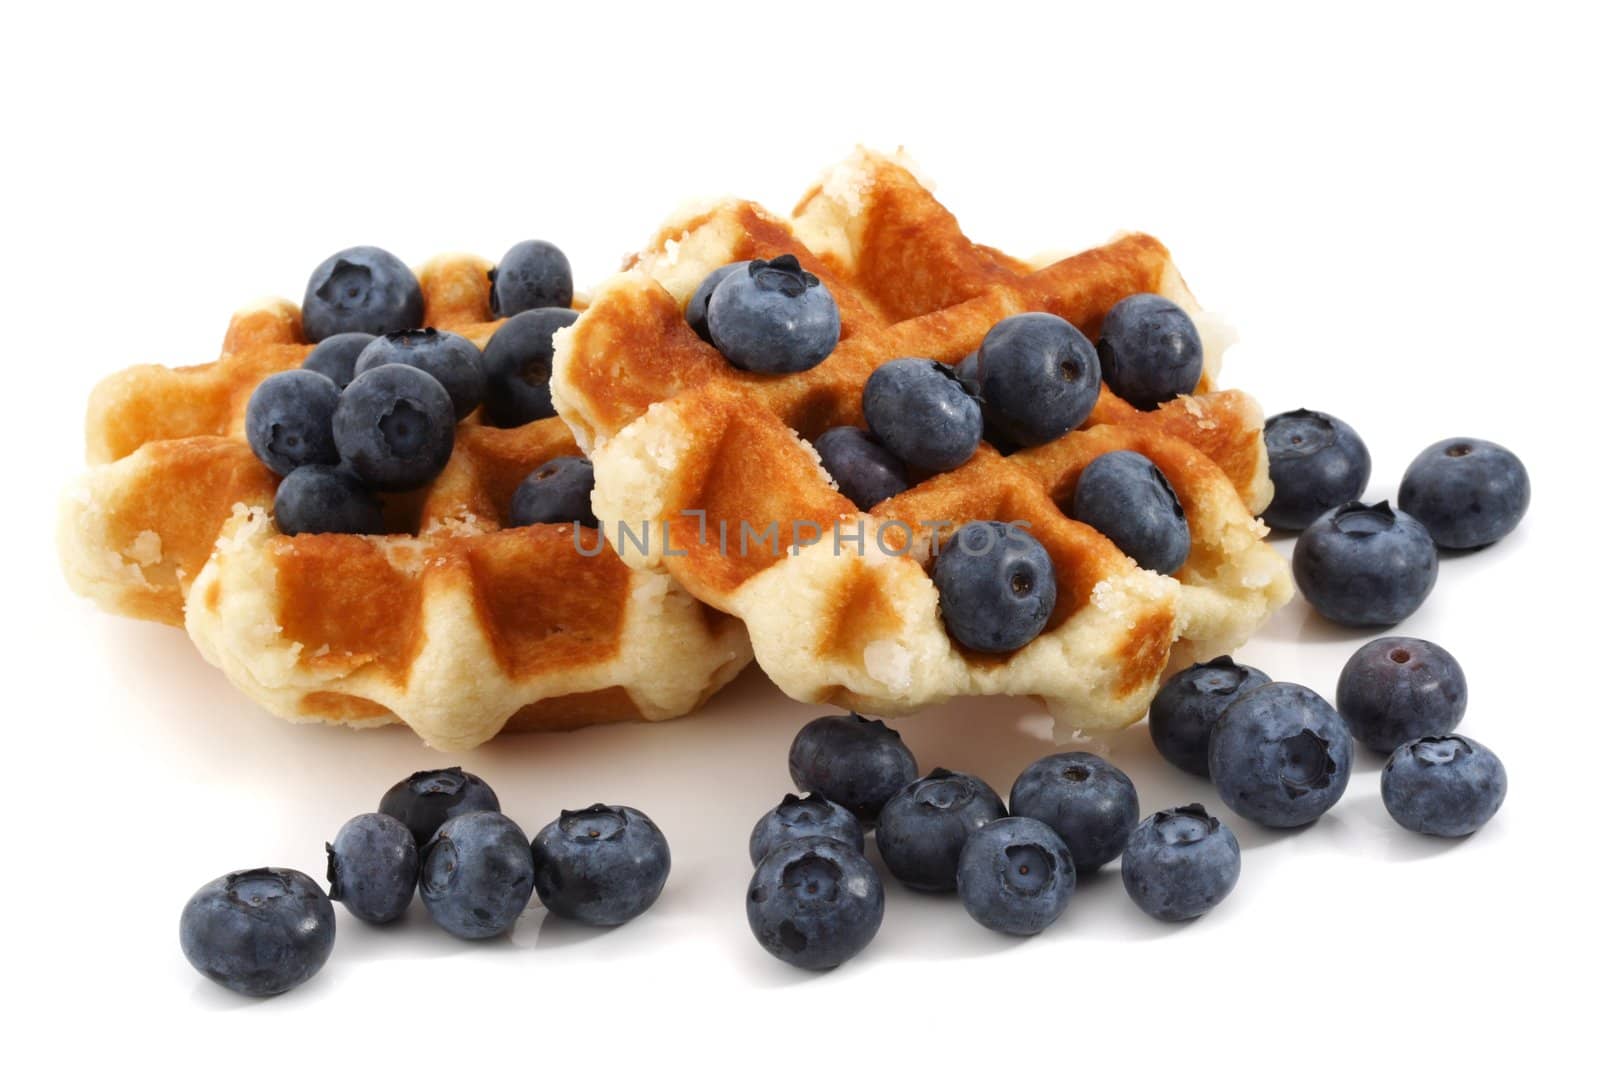 waffles and blueberries by lanalanglois